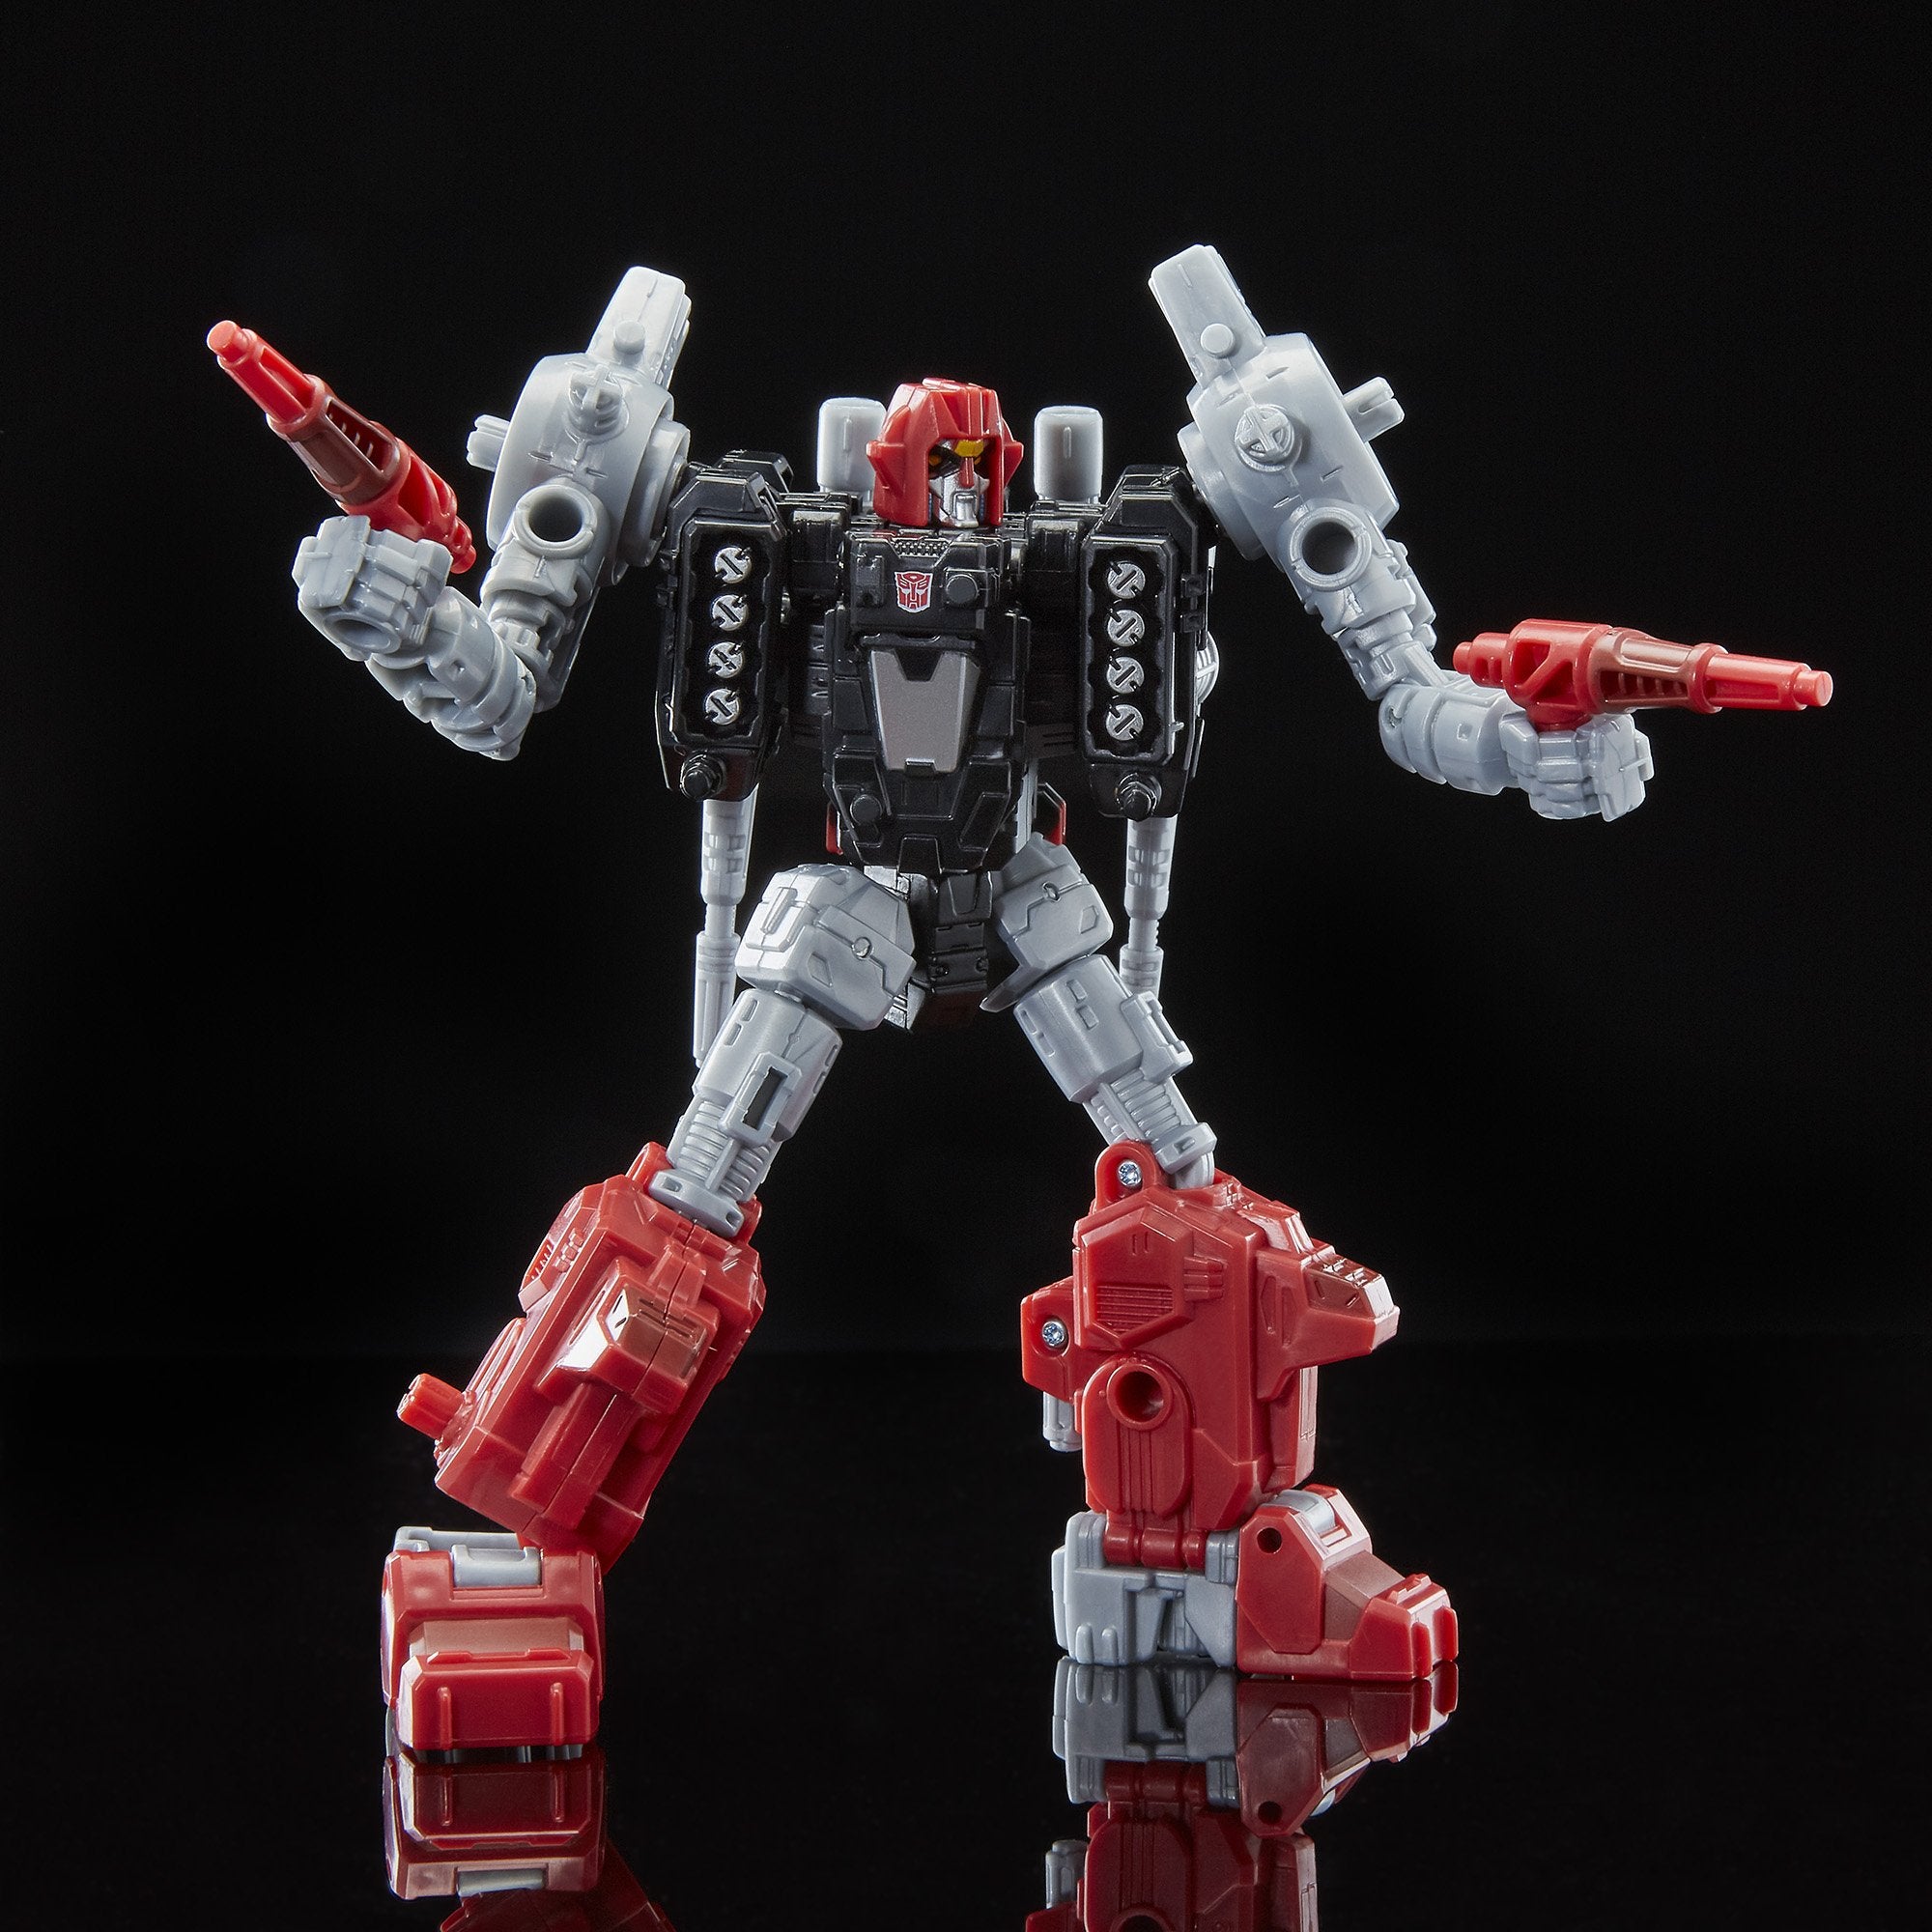 Transformers Generations Selects WFC-GS04 Deluxe Powerdasher Cromar Action Figure